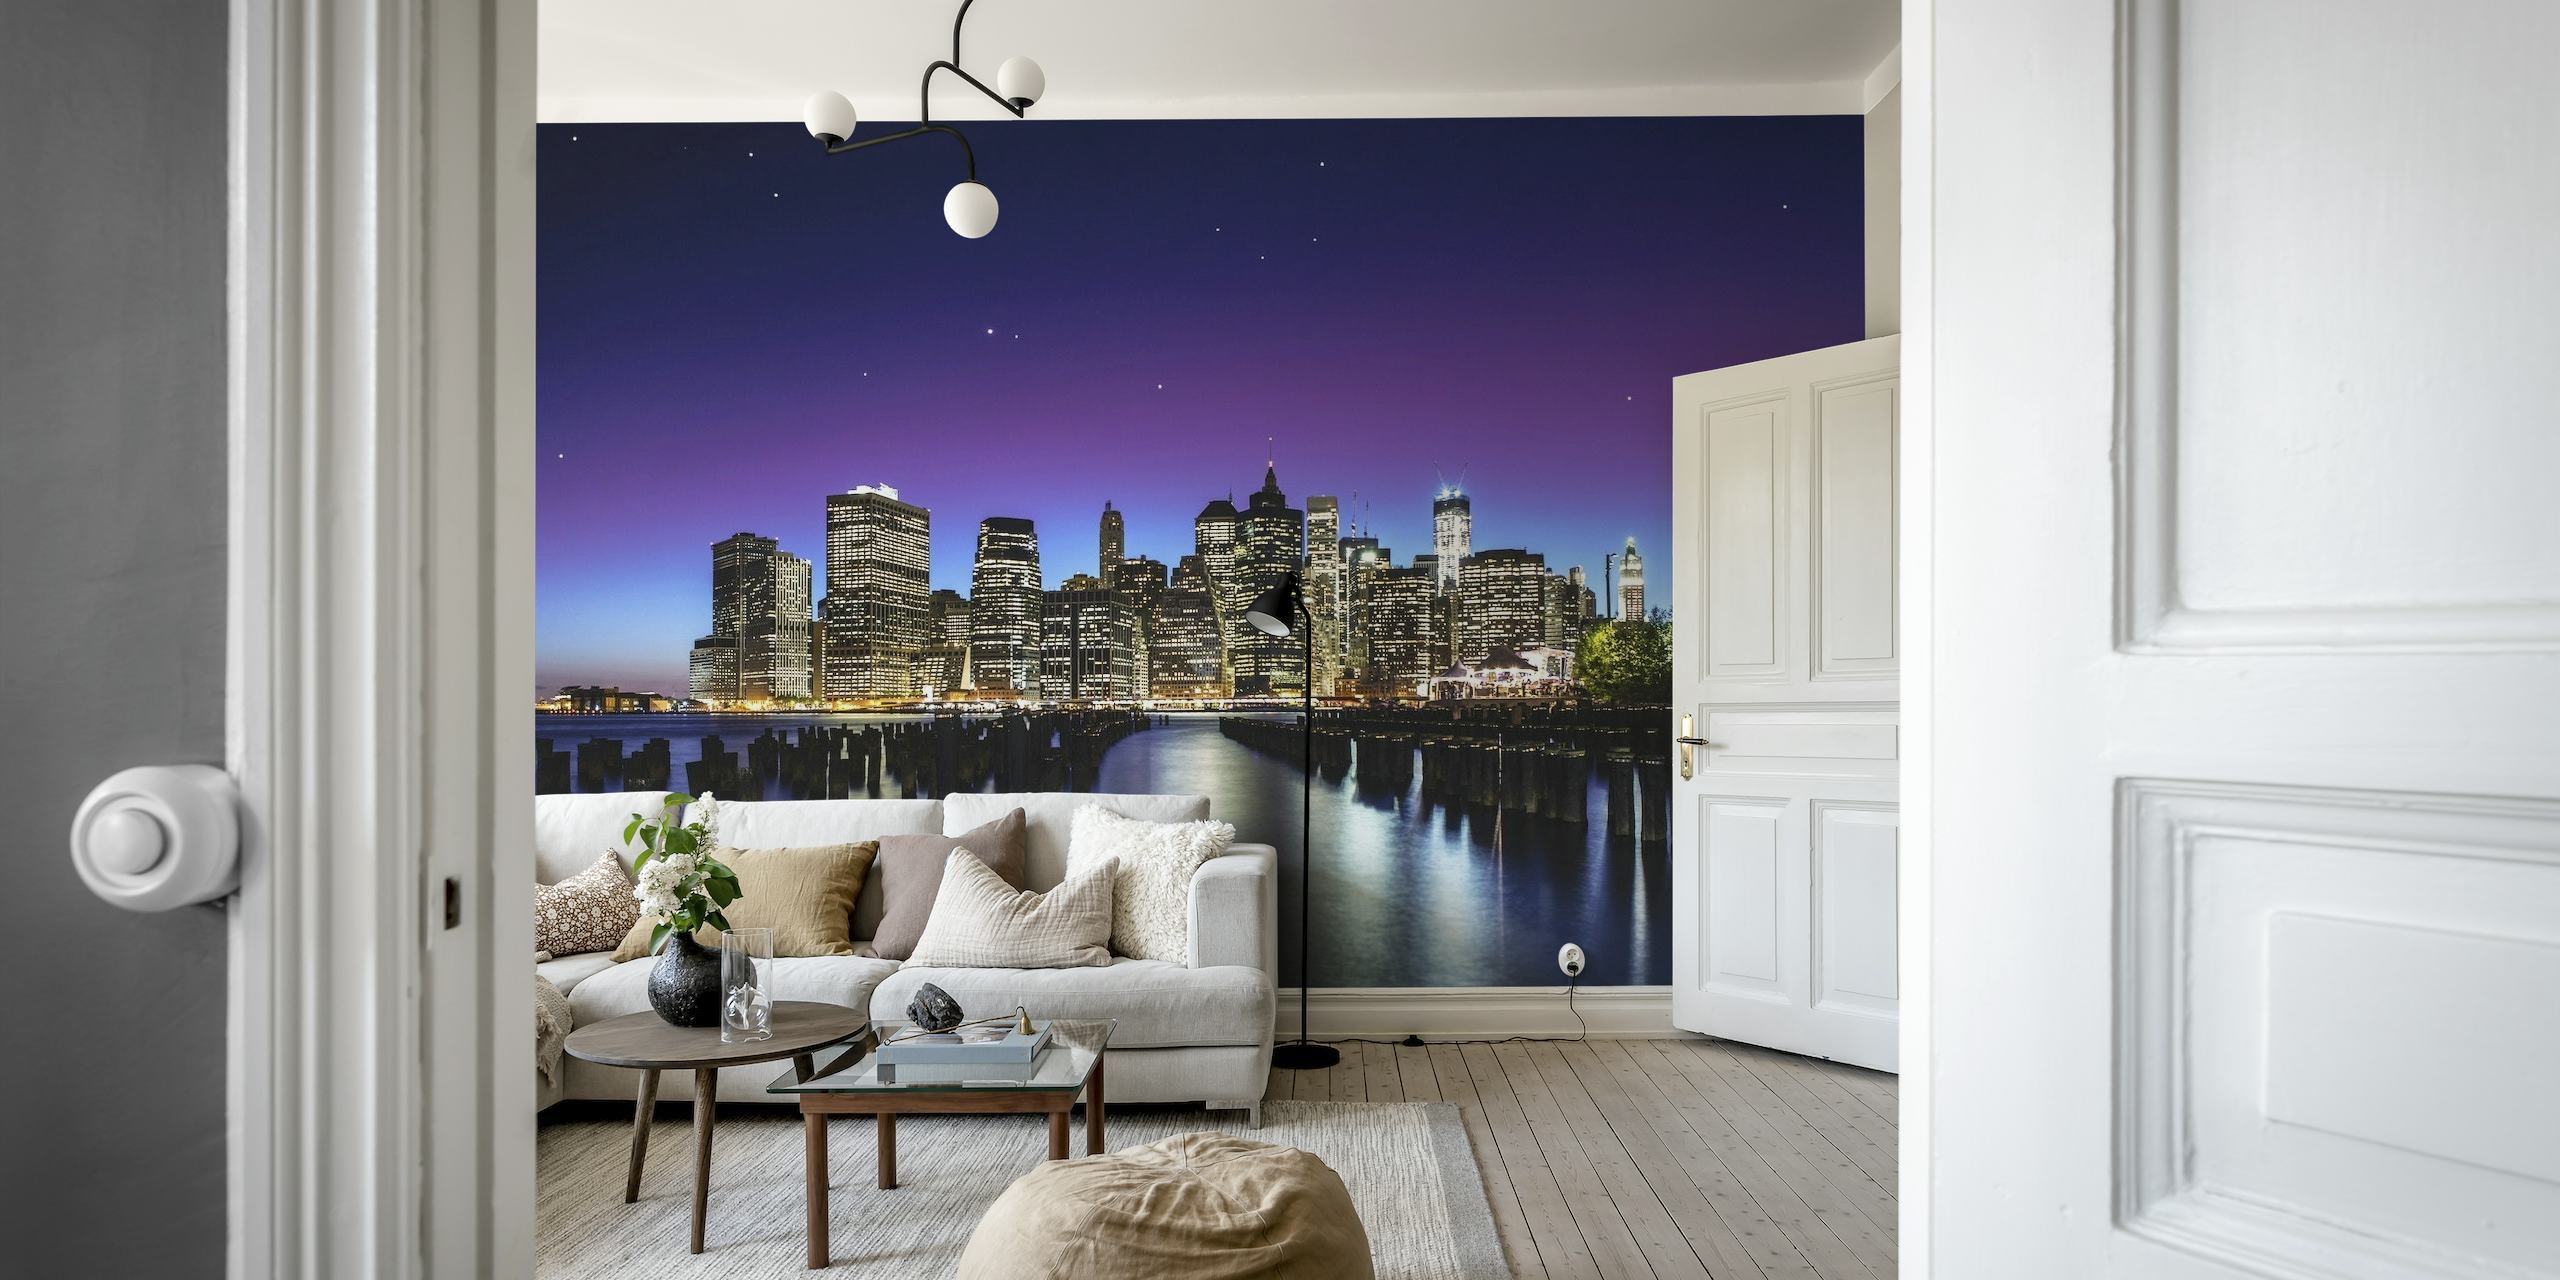 New York City skyline wall mural with a twilight backdrop and reflection on water